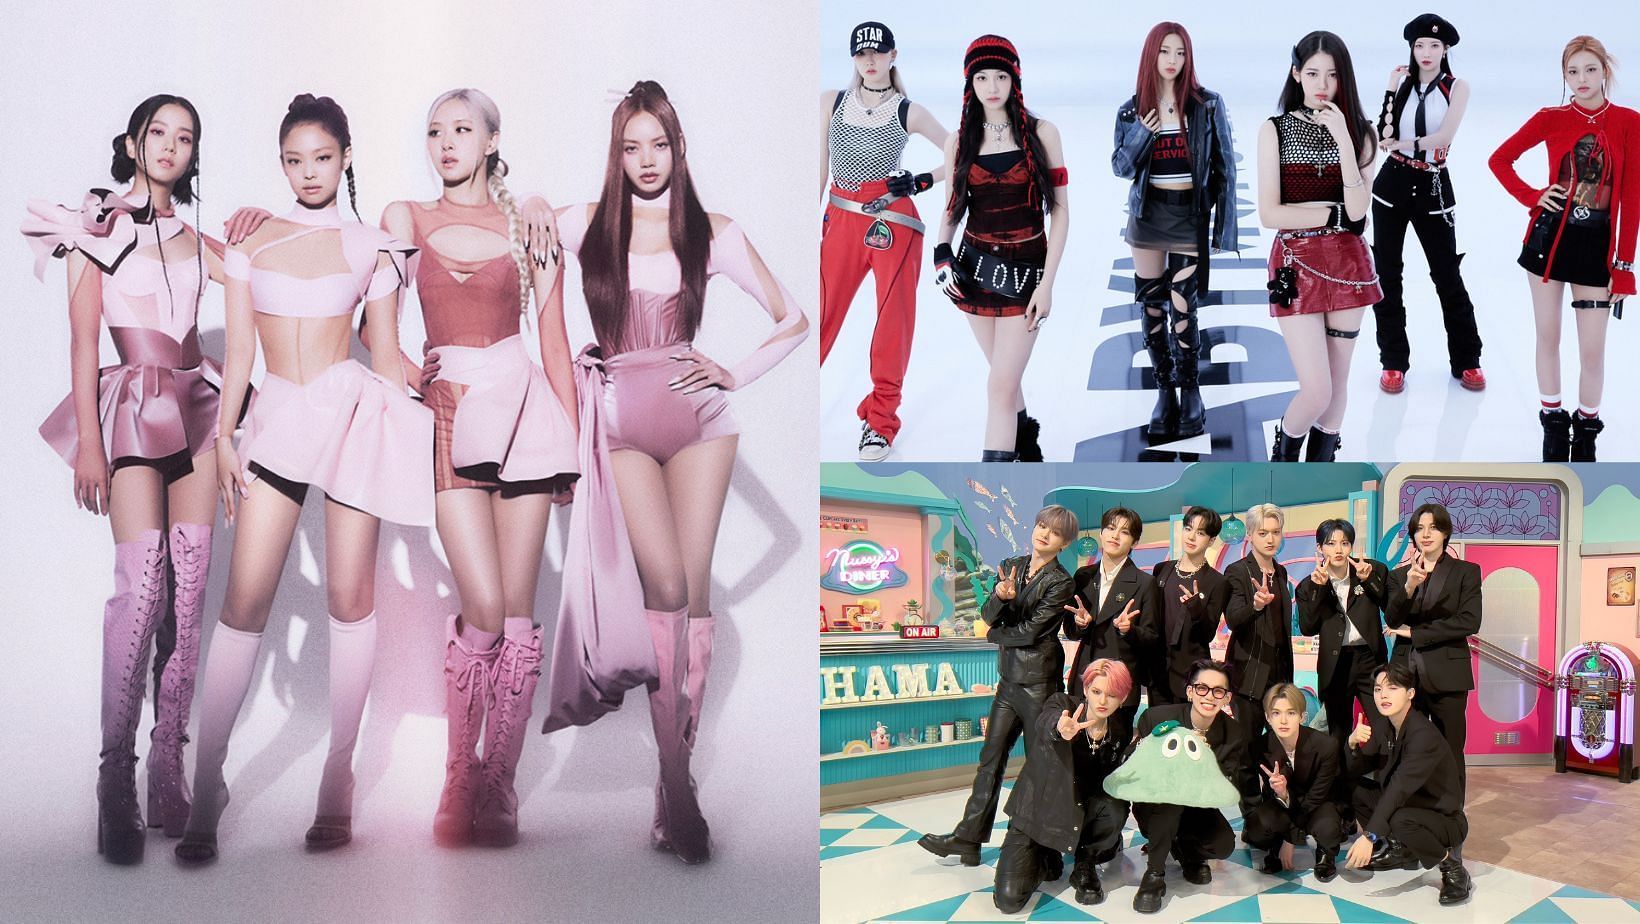 Industry experts report BABYMONSTER and TREASURE to expected to match BLACKPINK